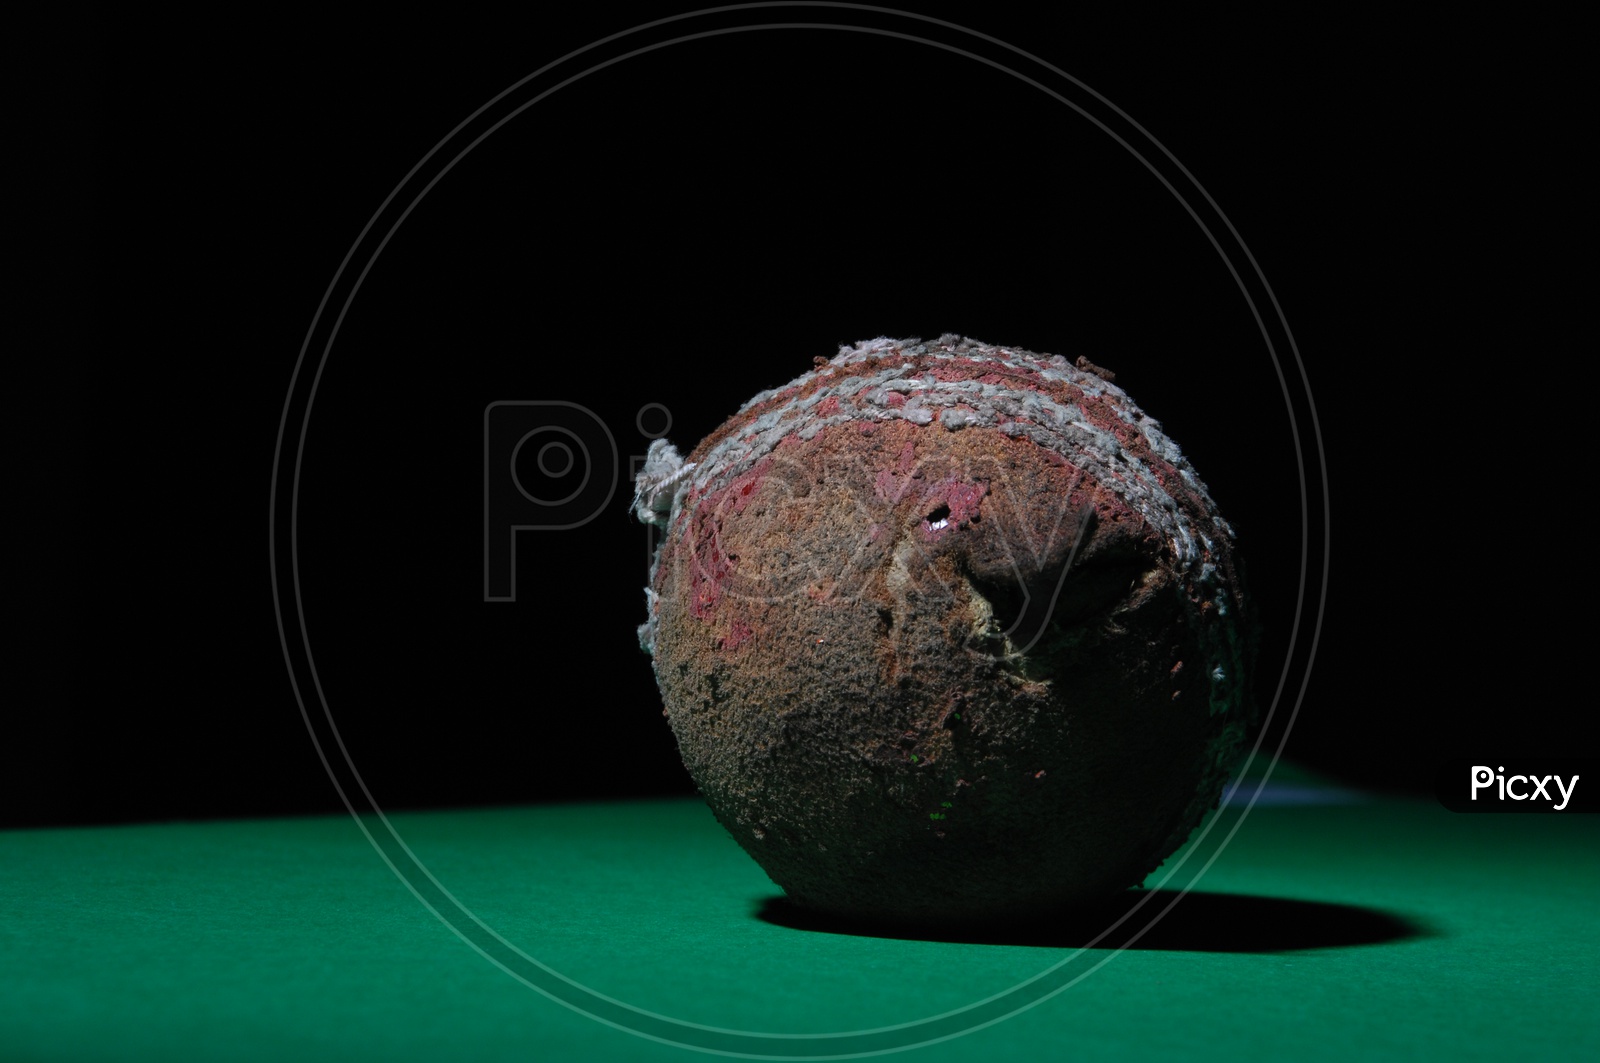 A used and worn out cricket ball in green and black background